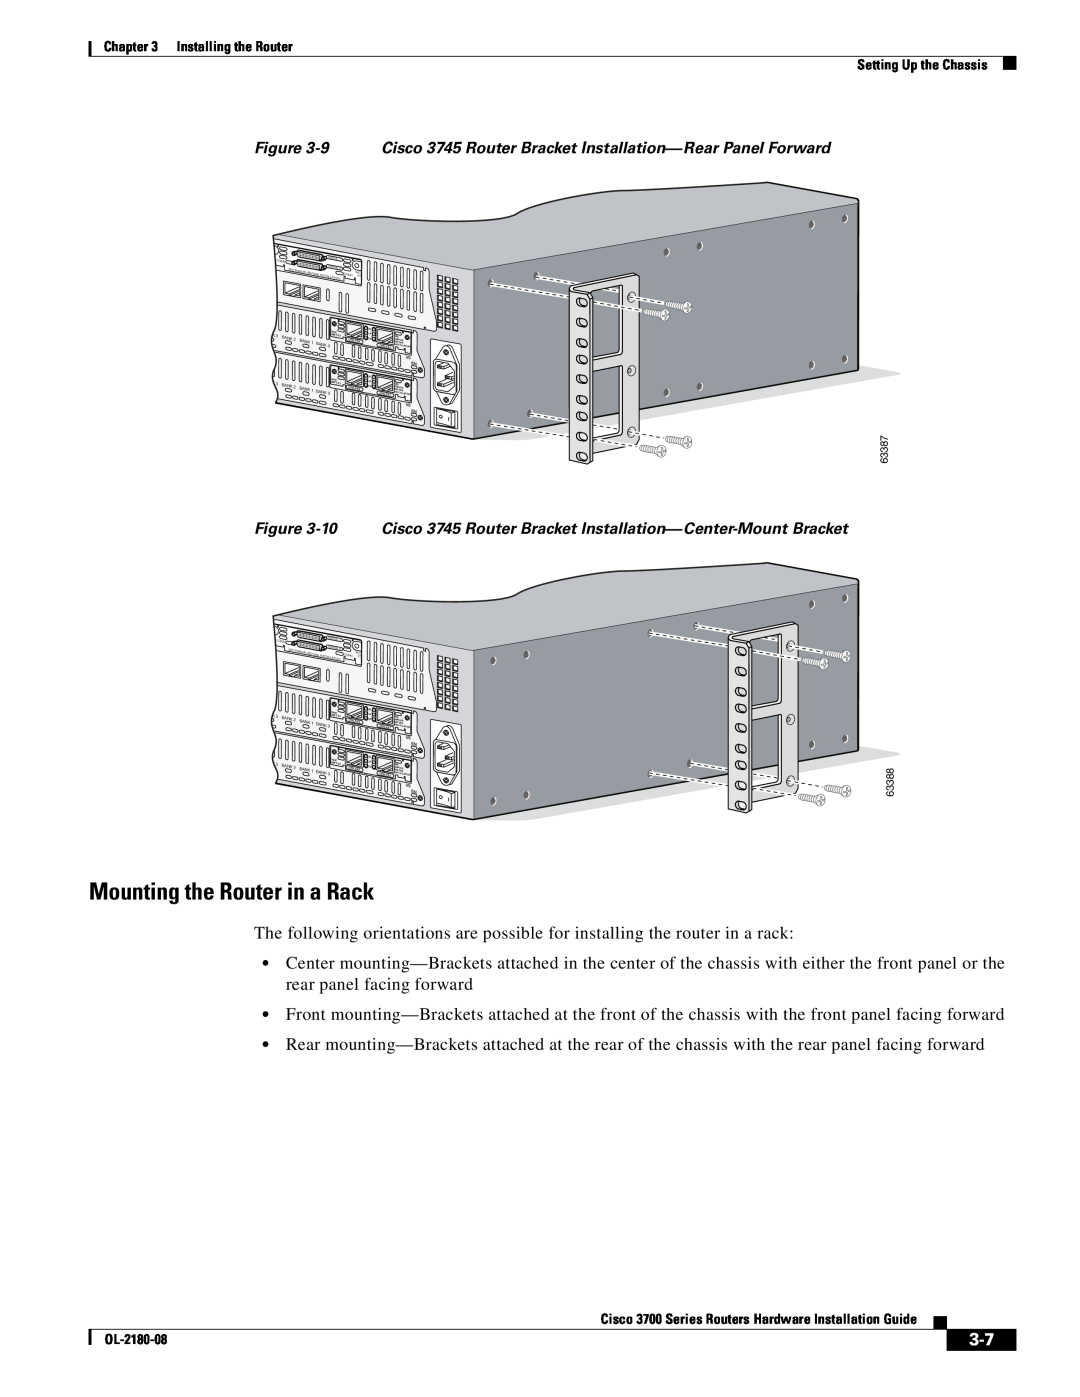 Cisco Systems 3700 Series manual Mounting the Router in a Rack, 9 Cisco 3745 Router Bracket Installation-Rear Panel Forward 